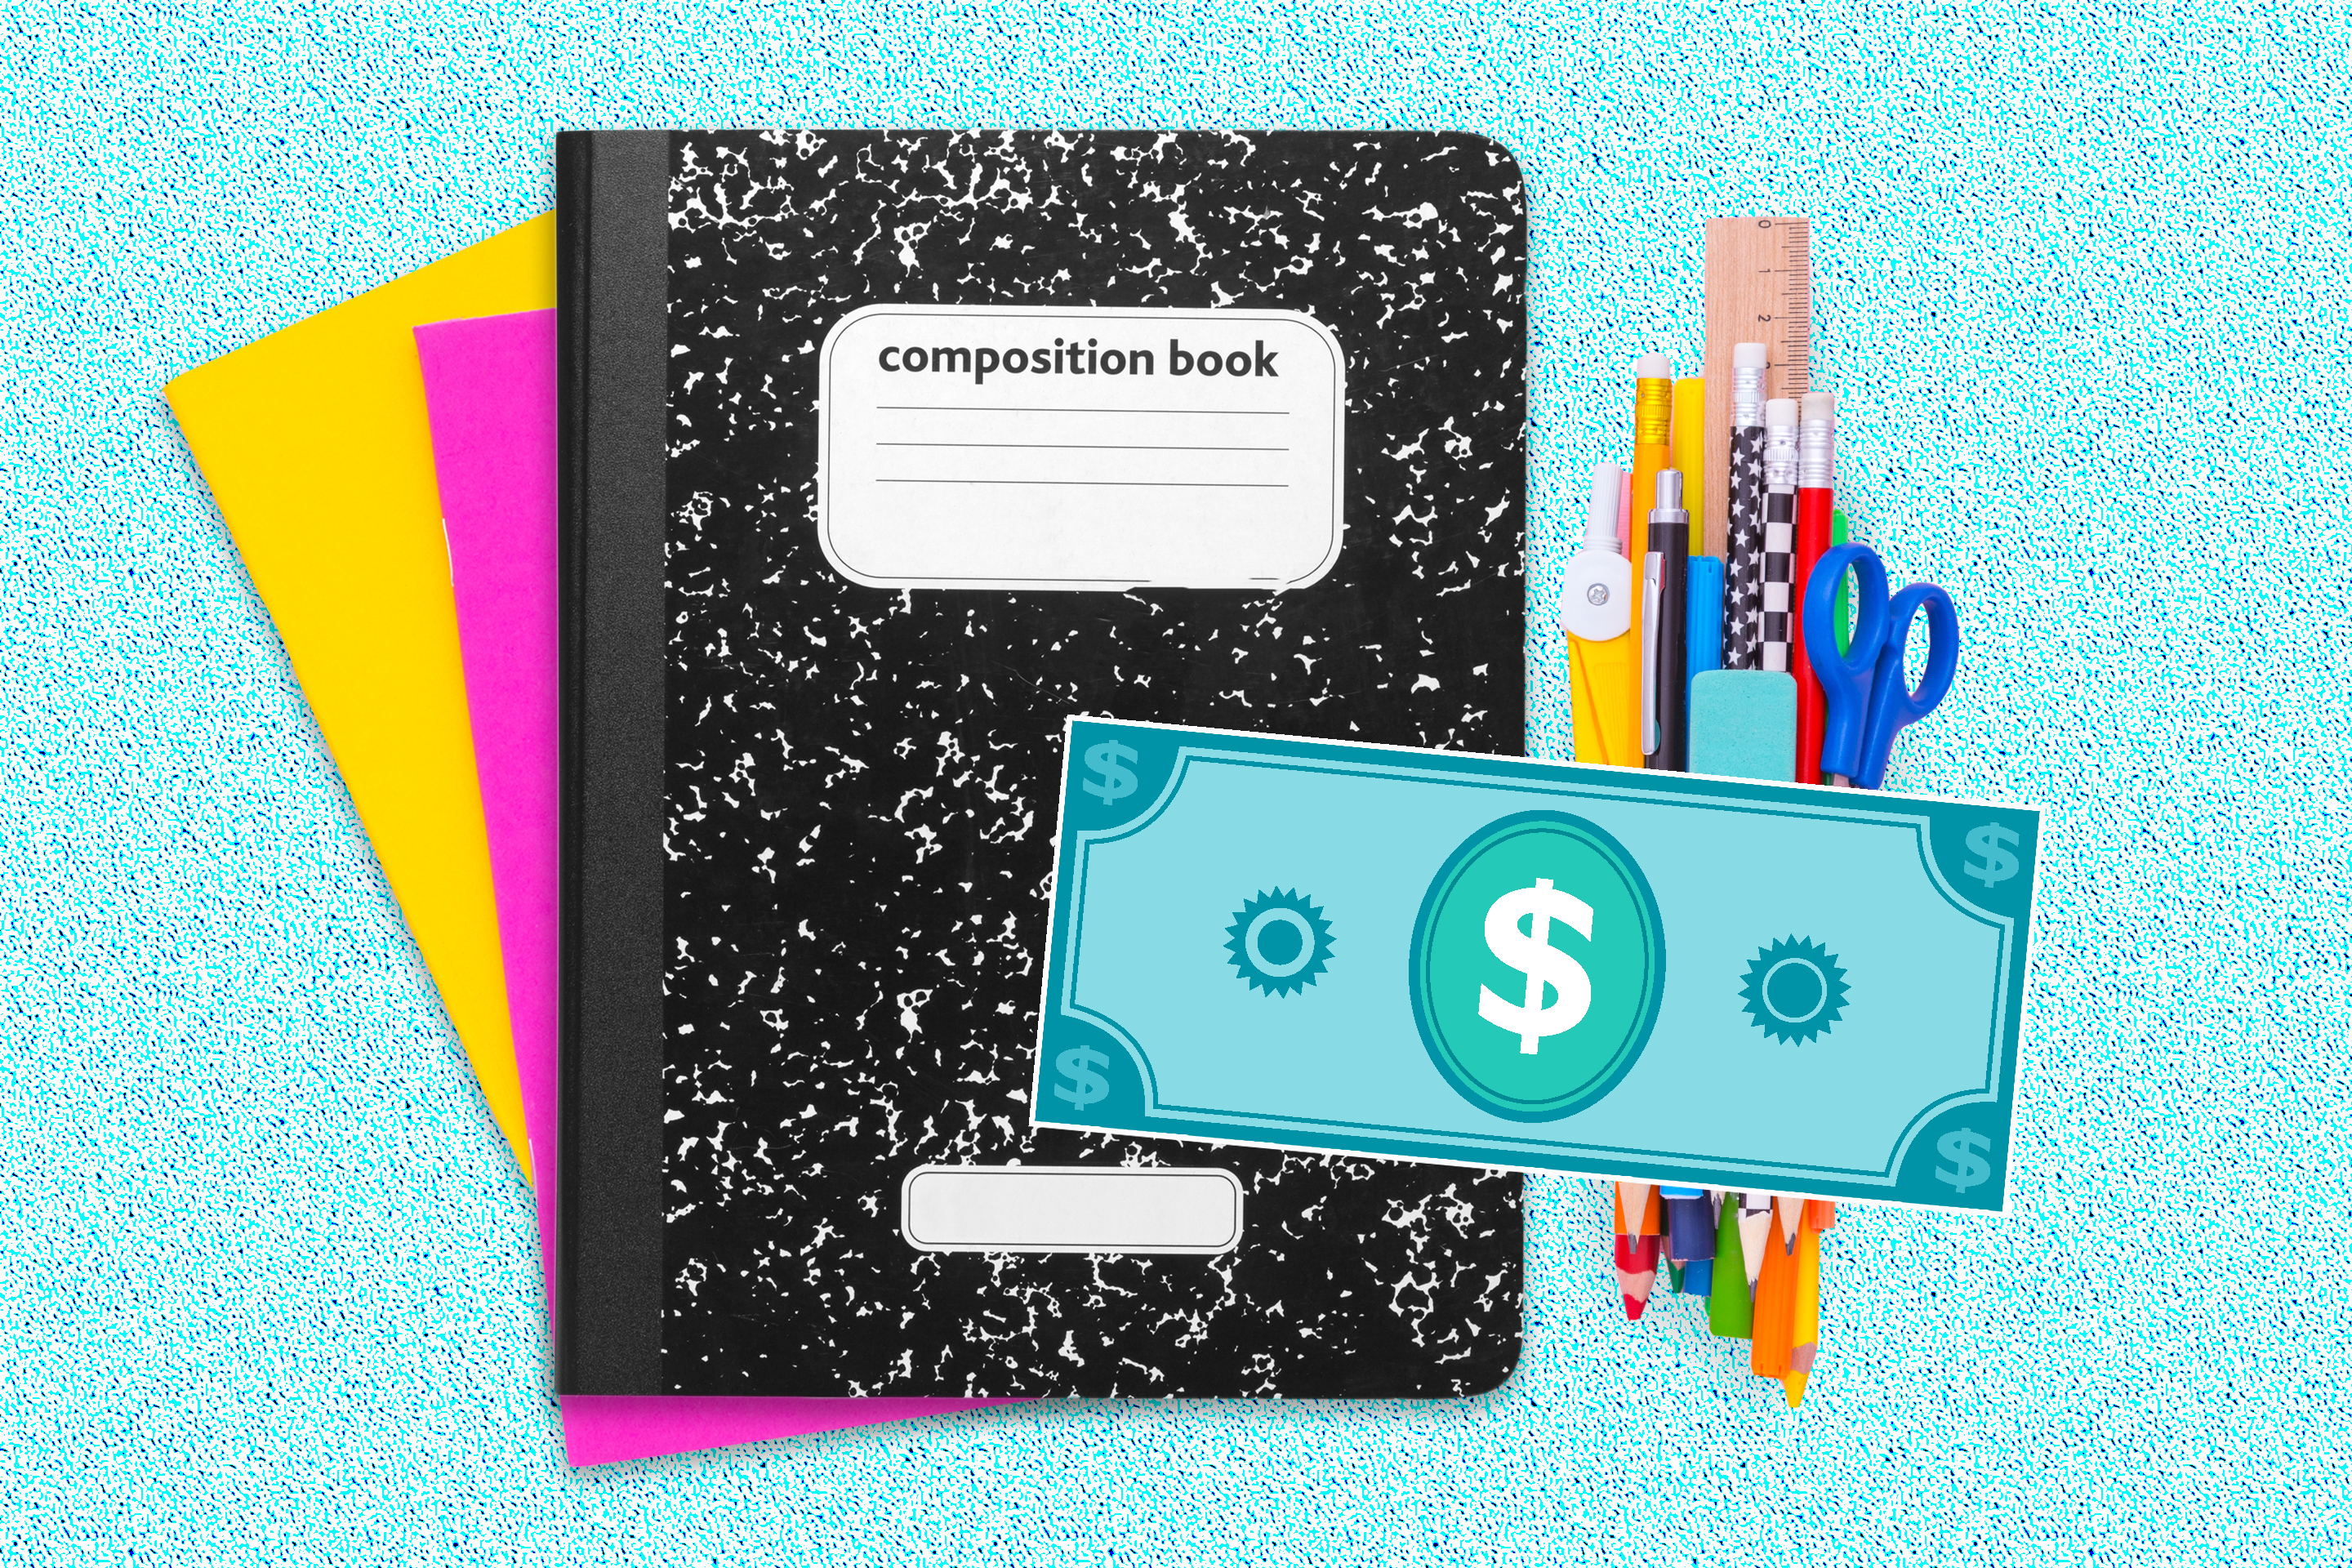 How You Can Save the Most on Back-to-School Supplies, According to a Very Frugal Shopper